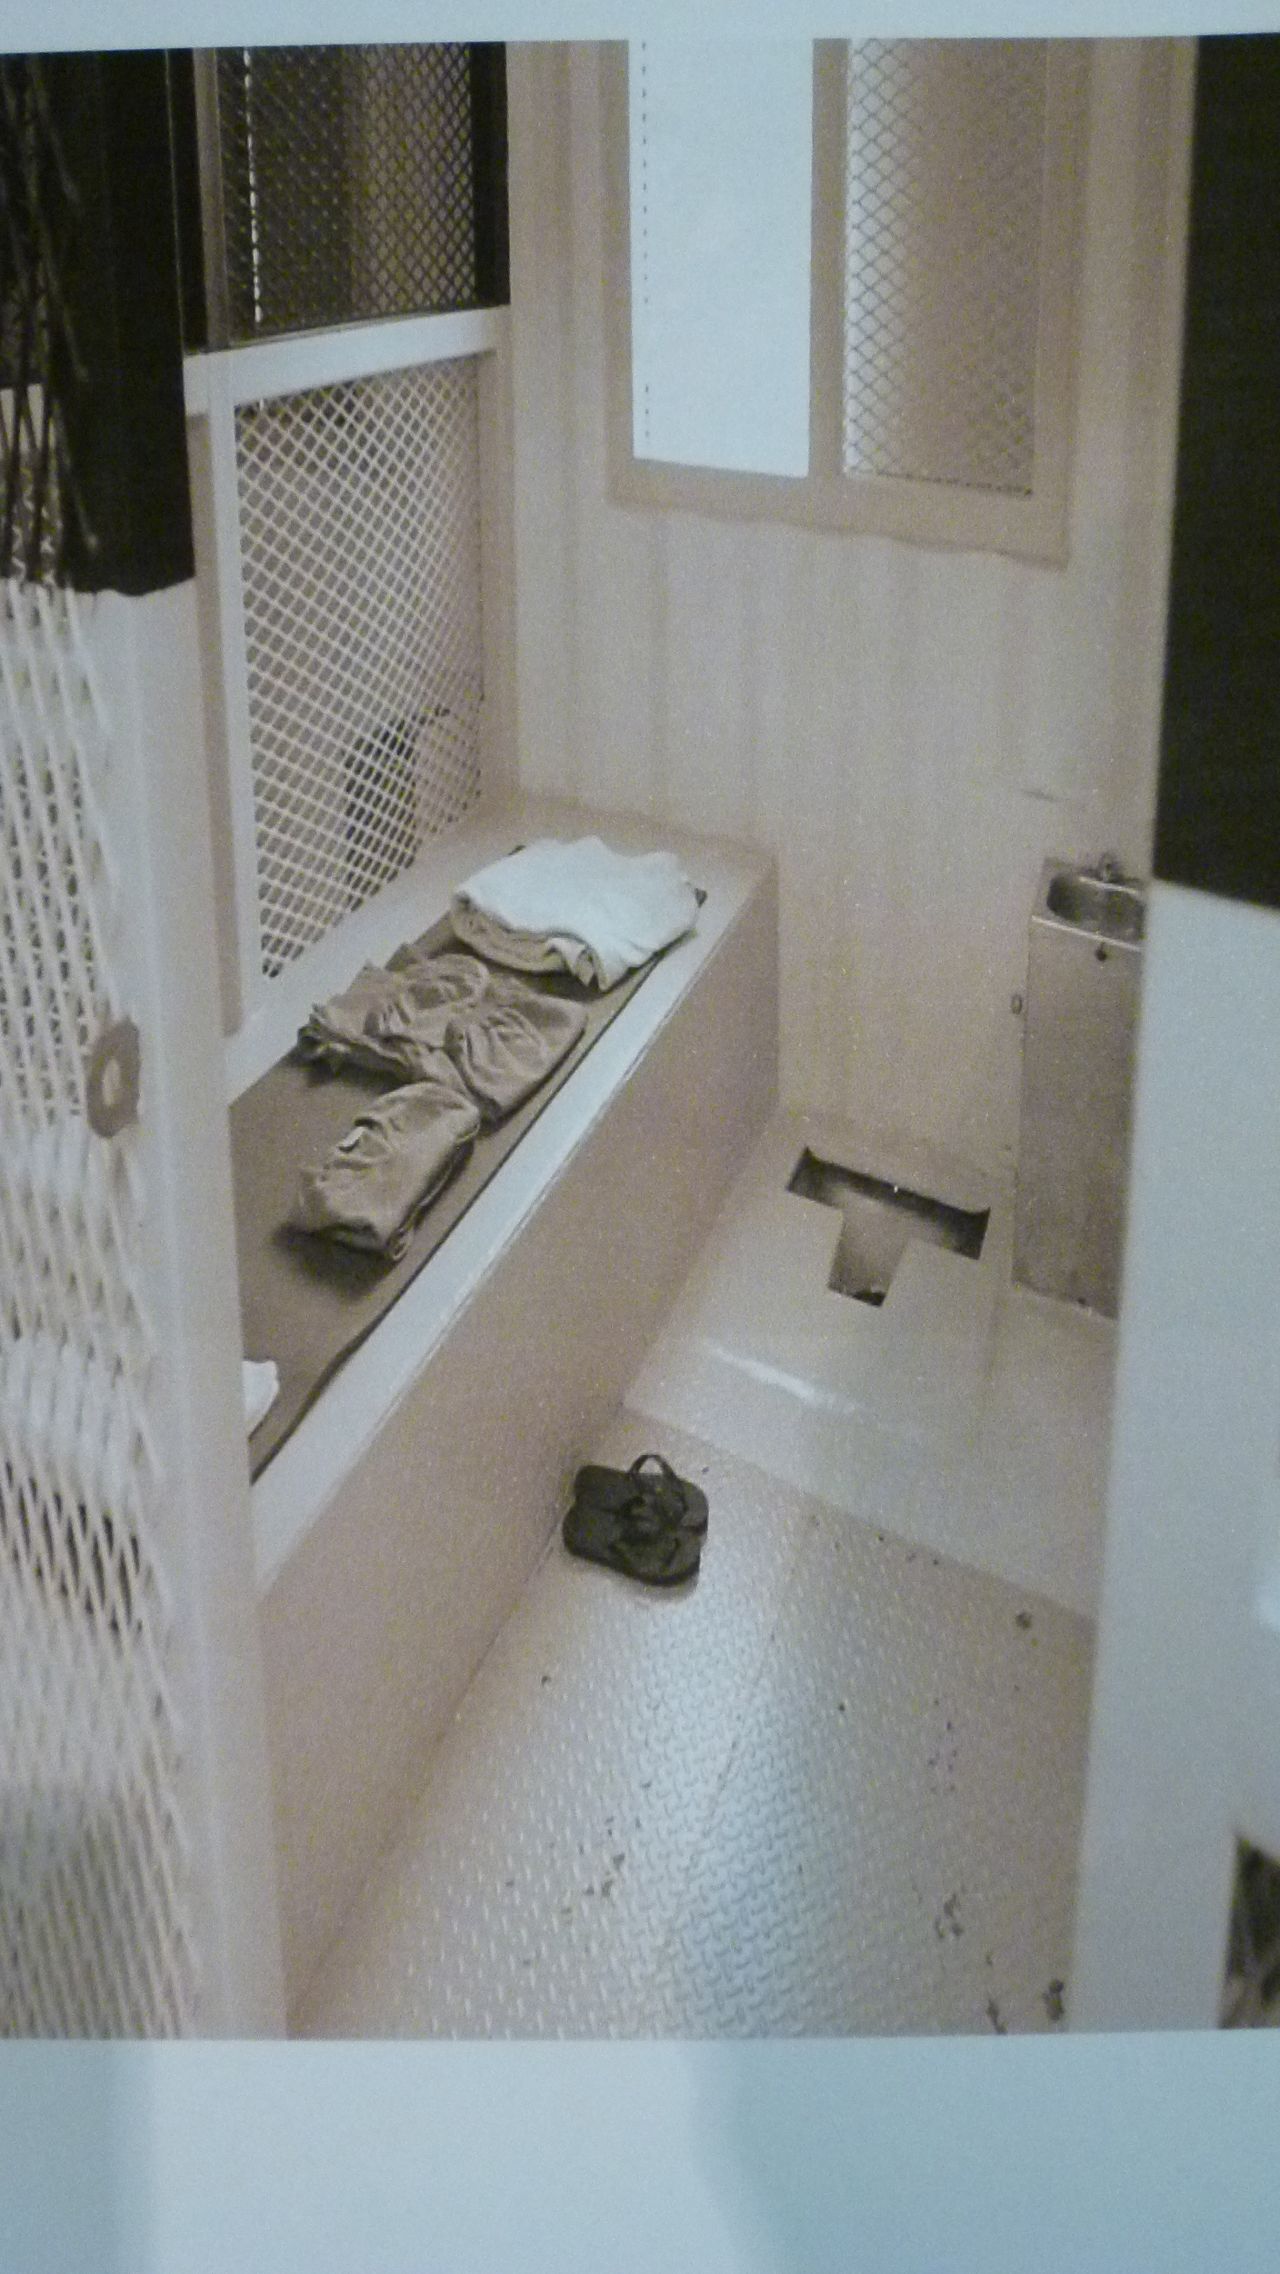 A photograph of the cell in which Rabiah was held.